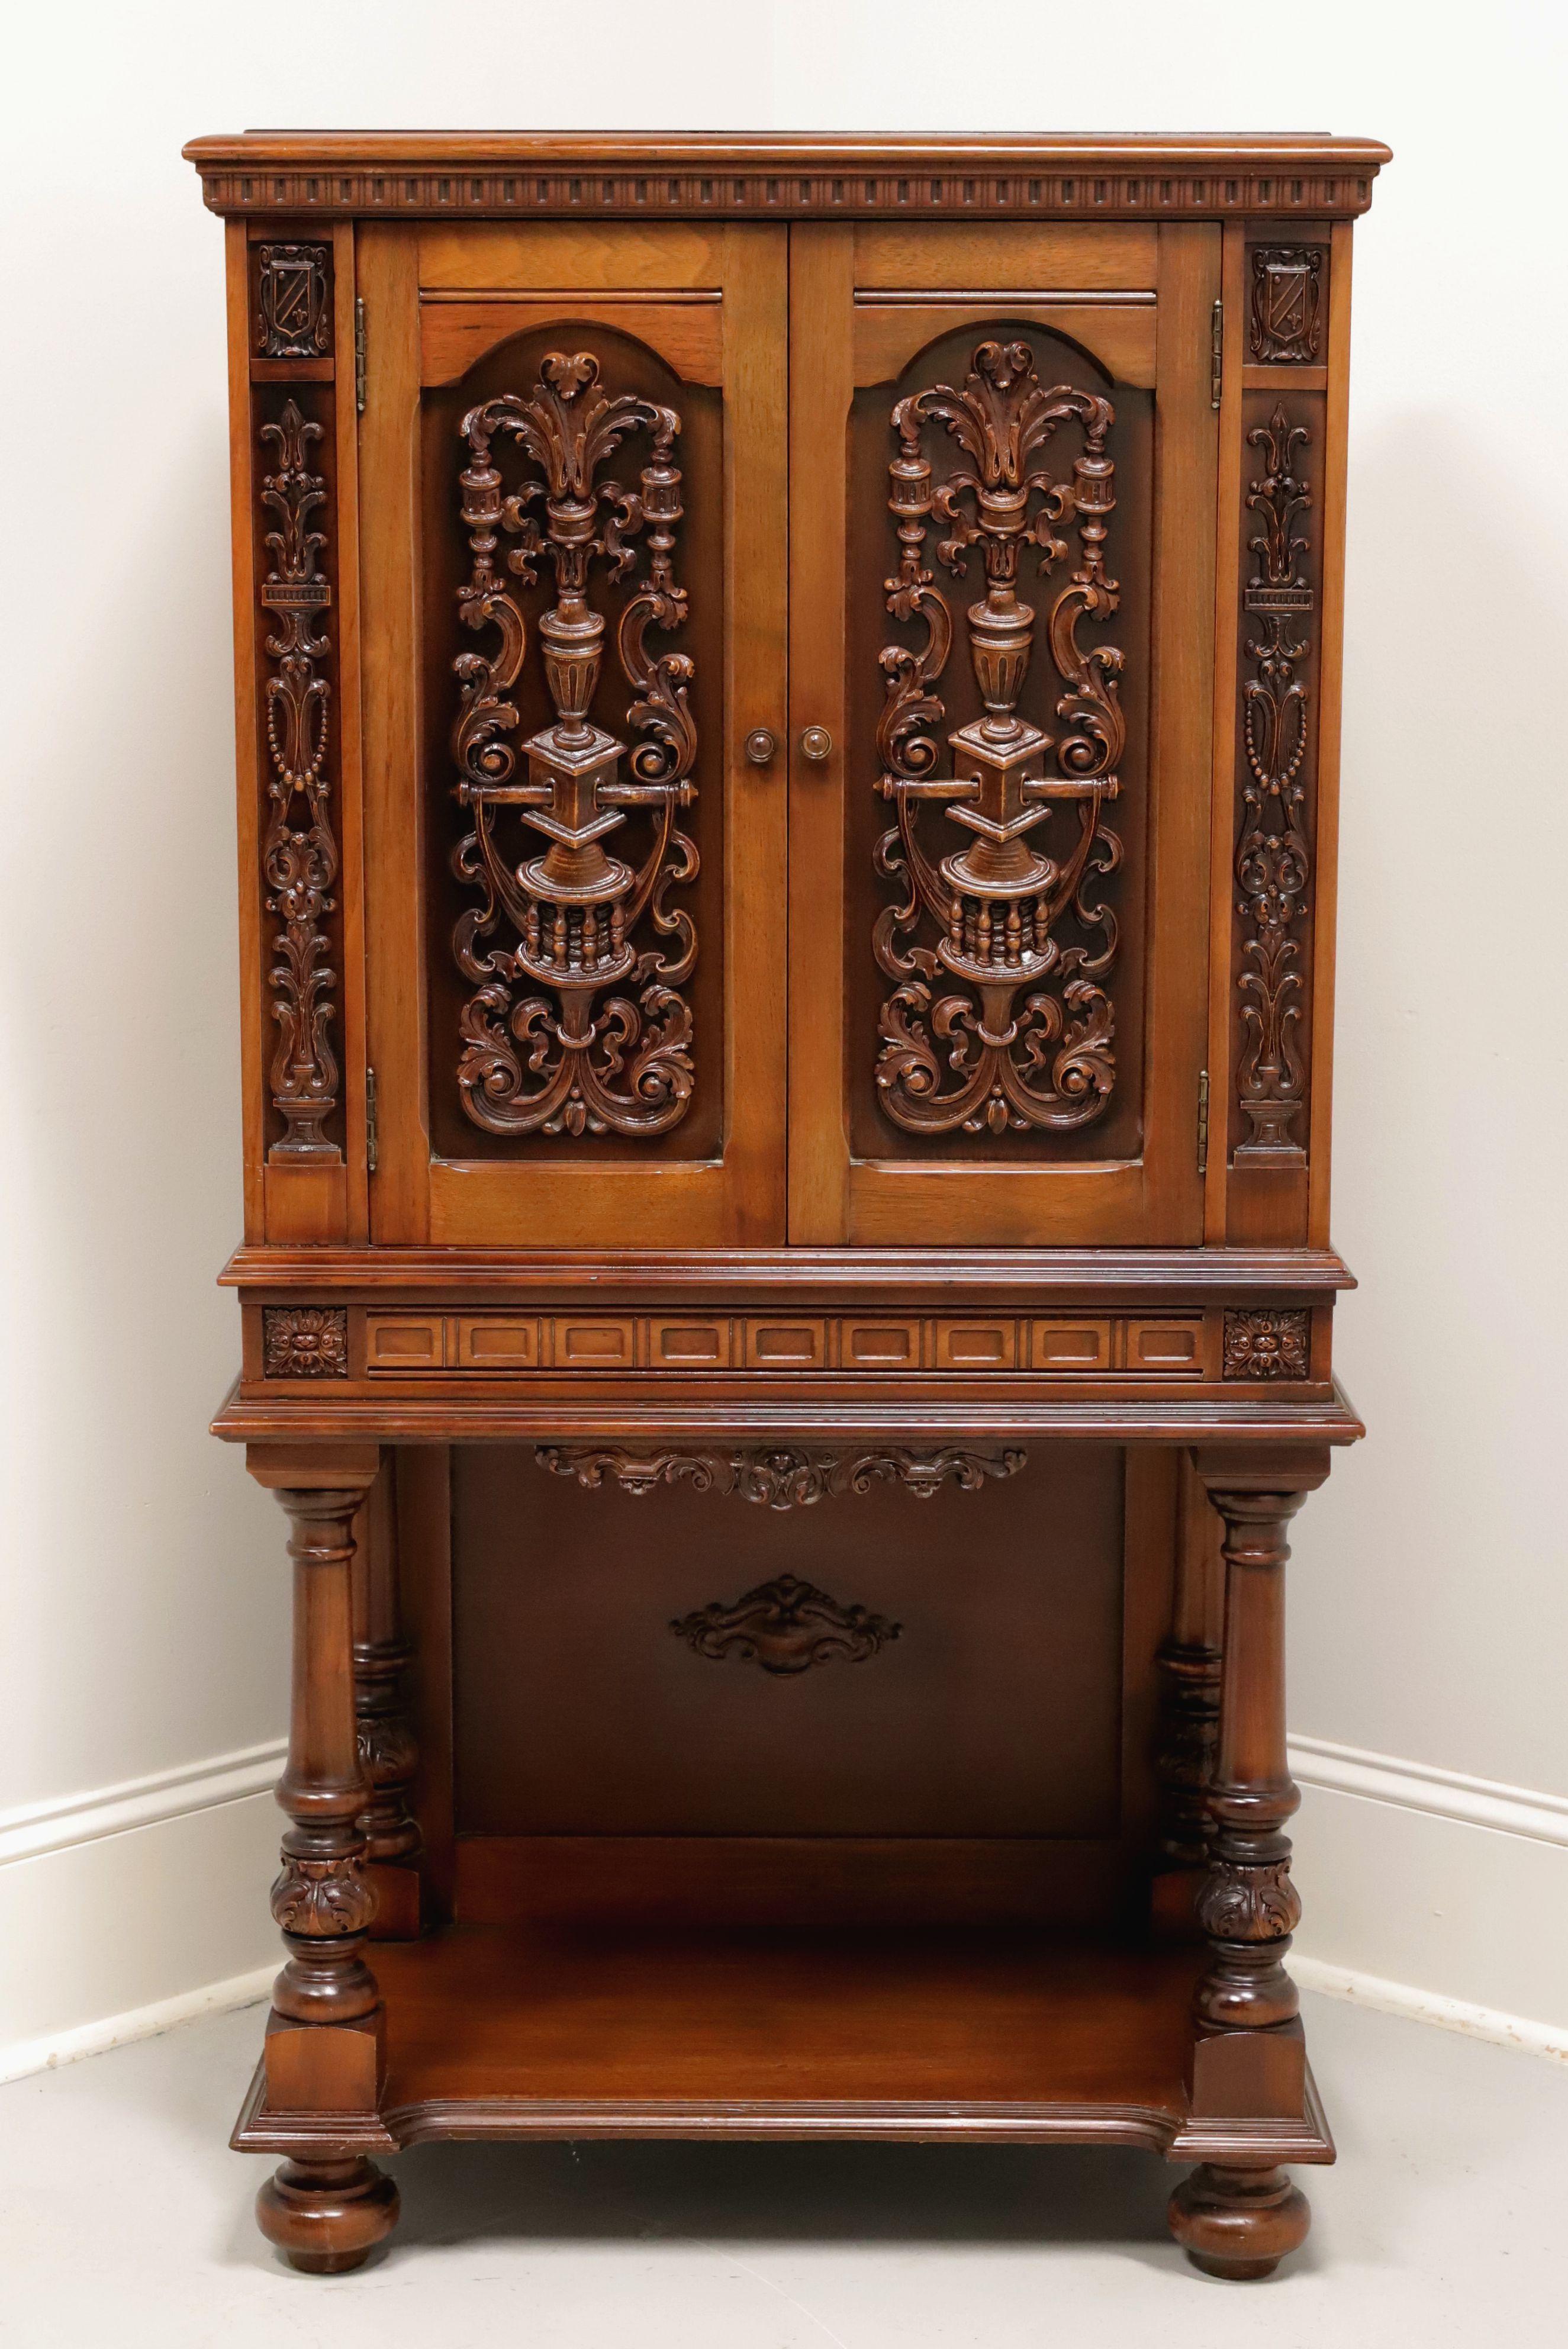 An antique Jacobean style file organizing cabinet, unbranded. Walnut with bevel edge to the top, decorative cornice, carved doors with wood knobs, decorative center apron with beveled edges, undertier shelf with back panel, decoratively carved